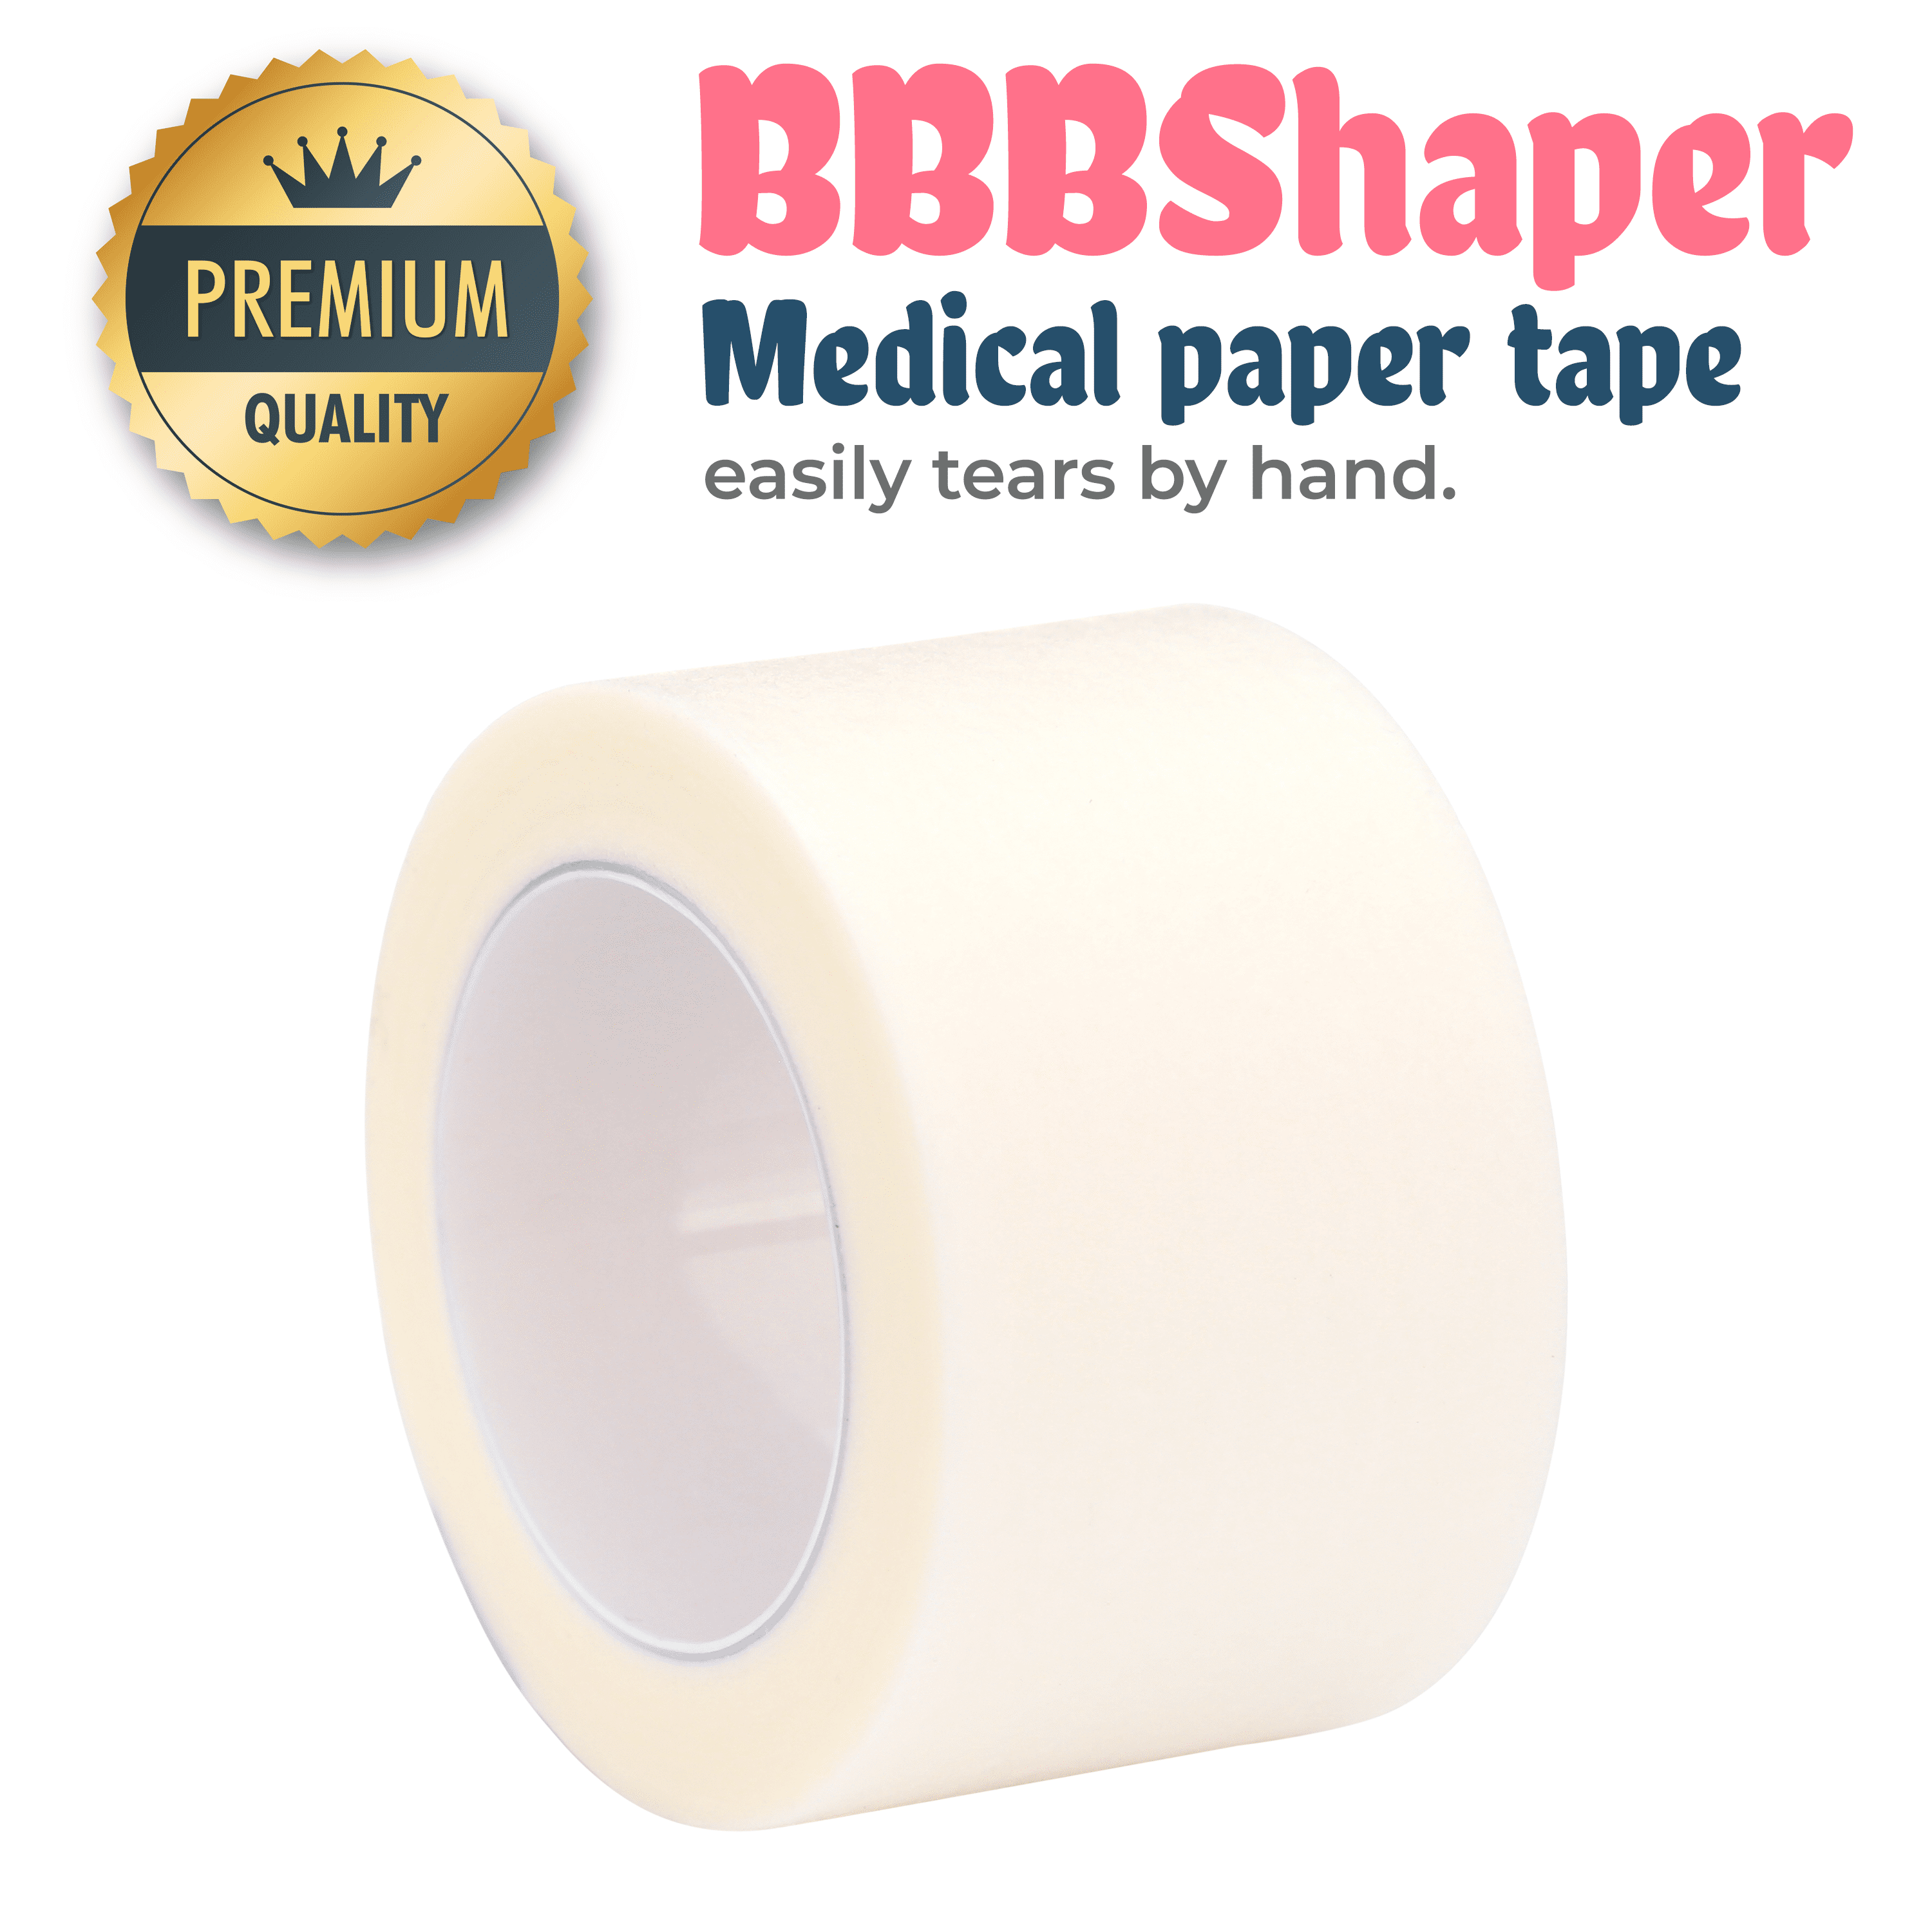 Lotfancy Medical Tape,12Rolls 1inch x 10yards, Surgical Paper Tapes, Wound First Aid Tape, 2 Dispensers Included